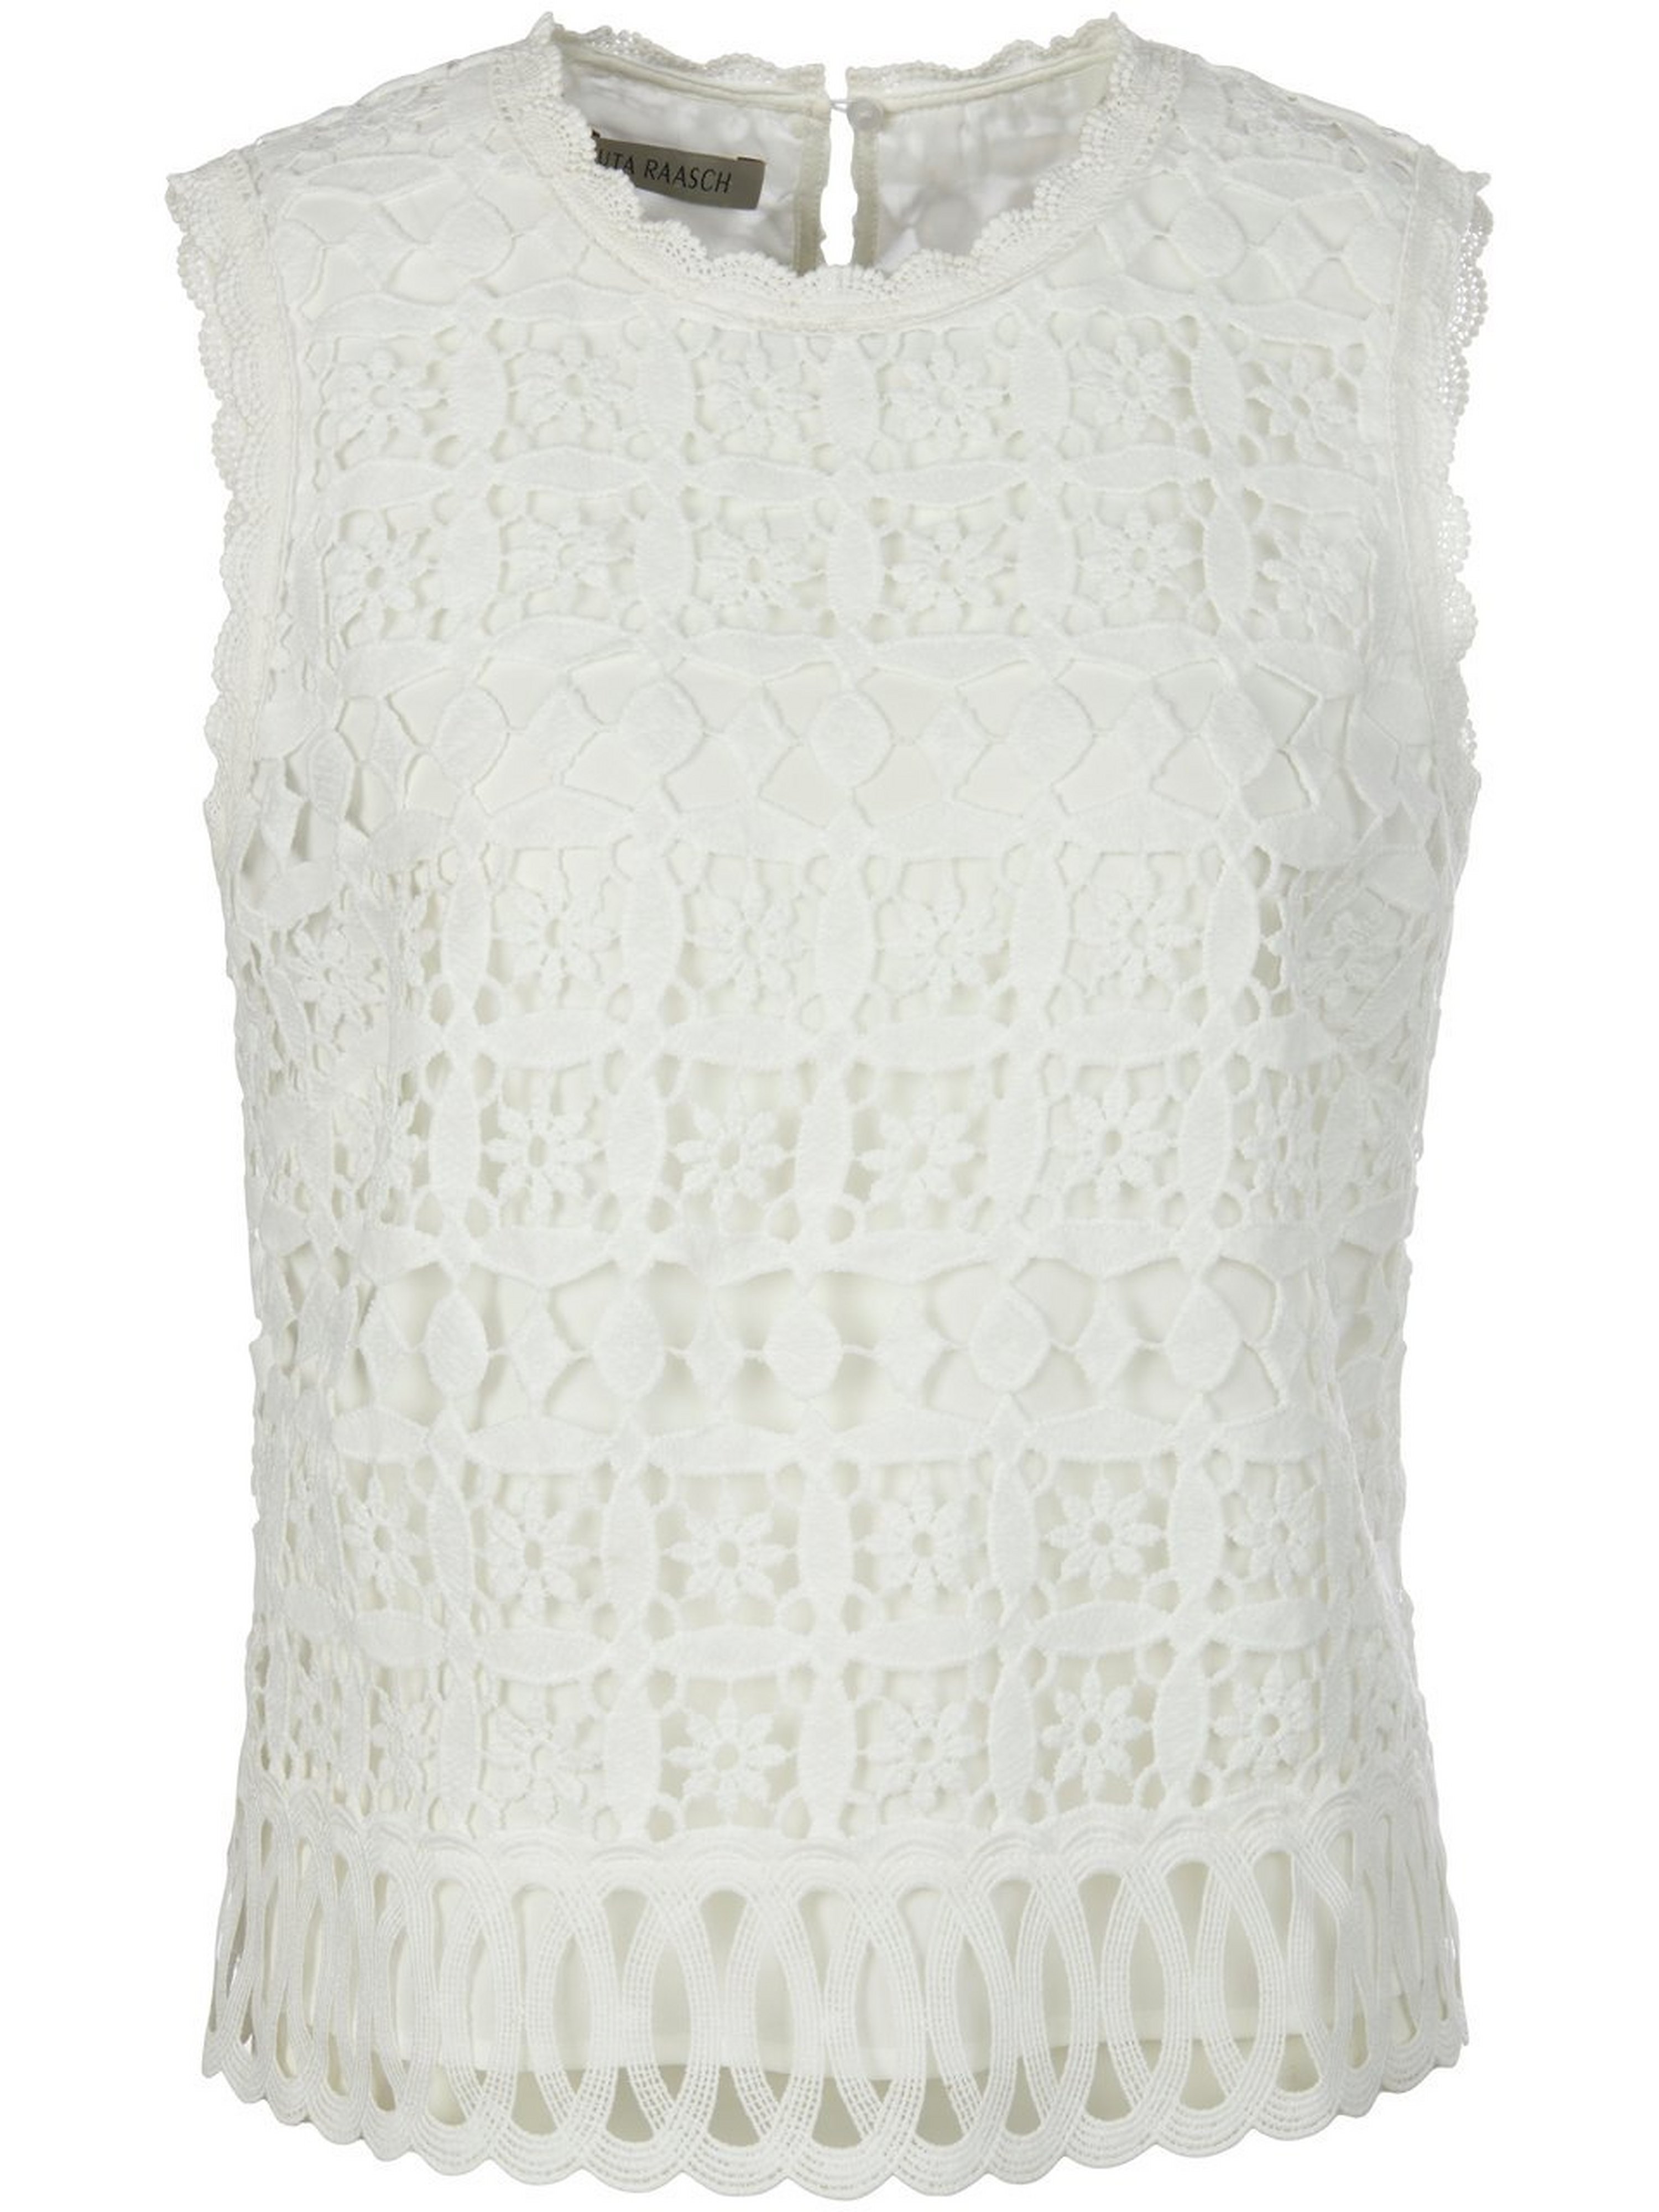 Le top dentelle 100% polyester  Uta Raasch blanc taille 50